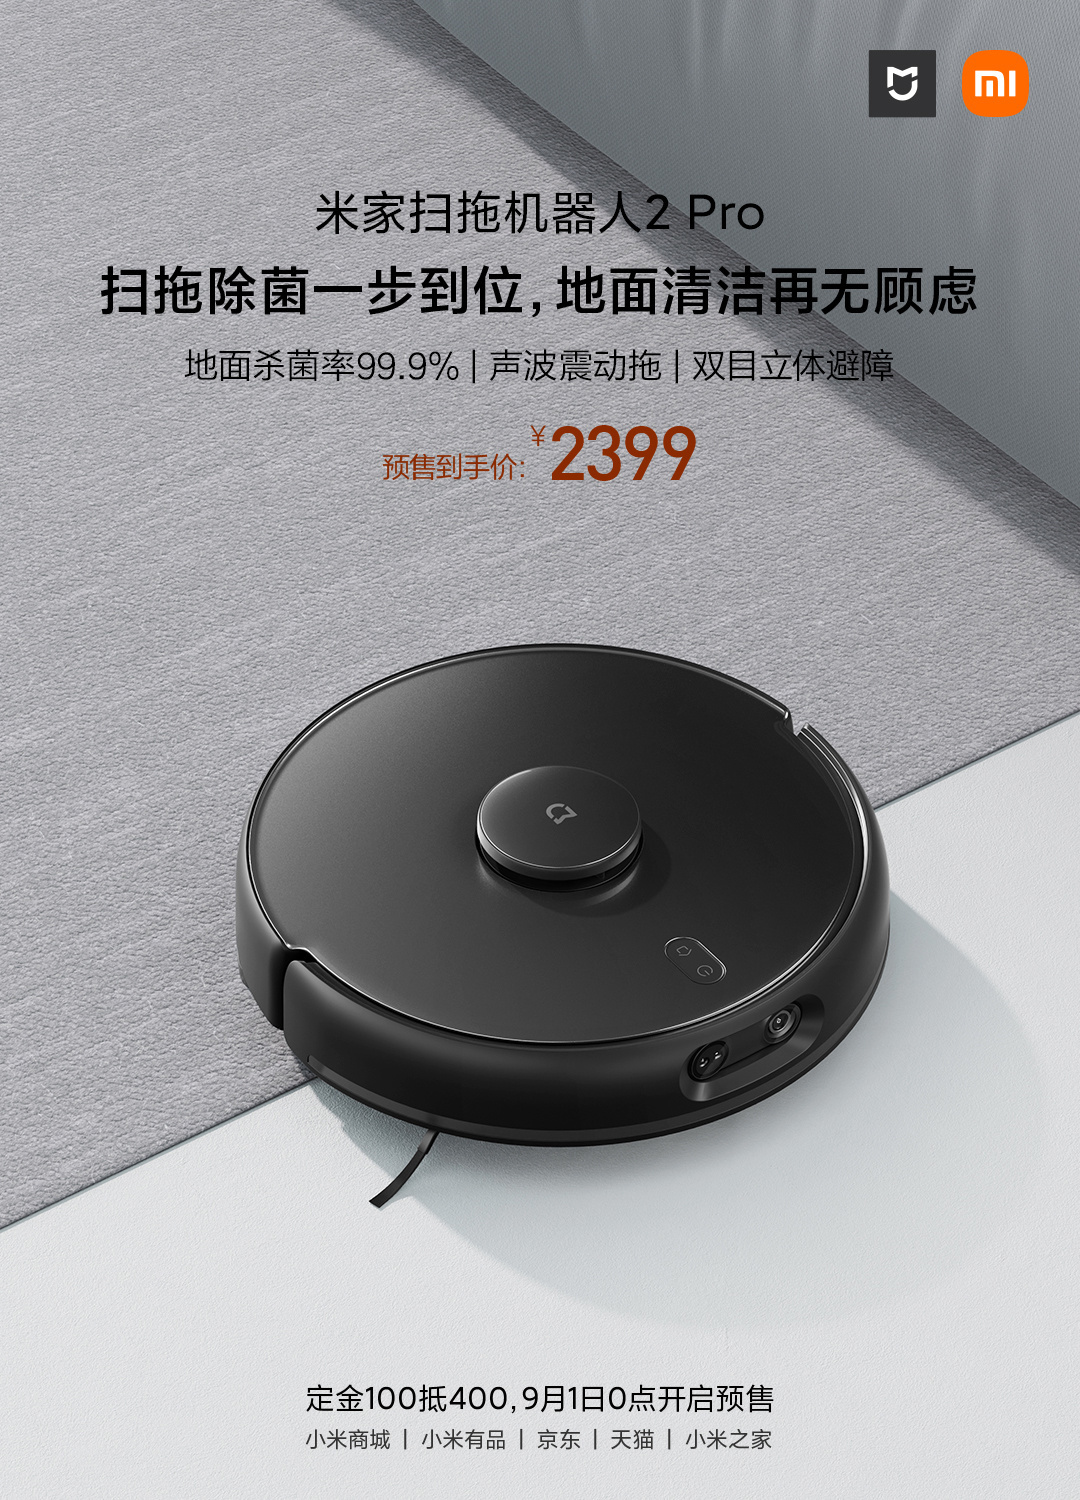 Xiaomi Mijia Sweeping and Mopping Robot 2Pro